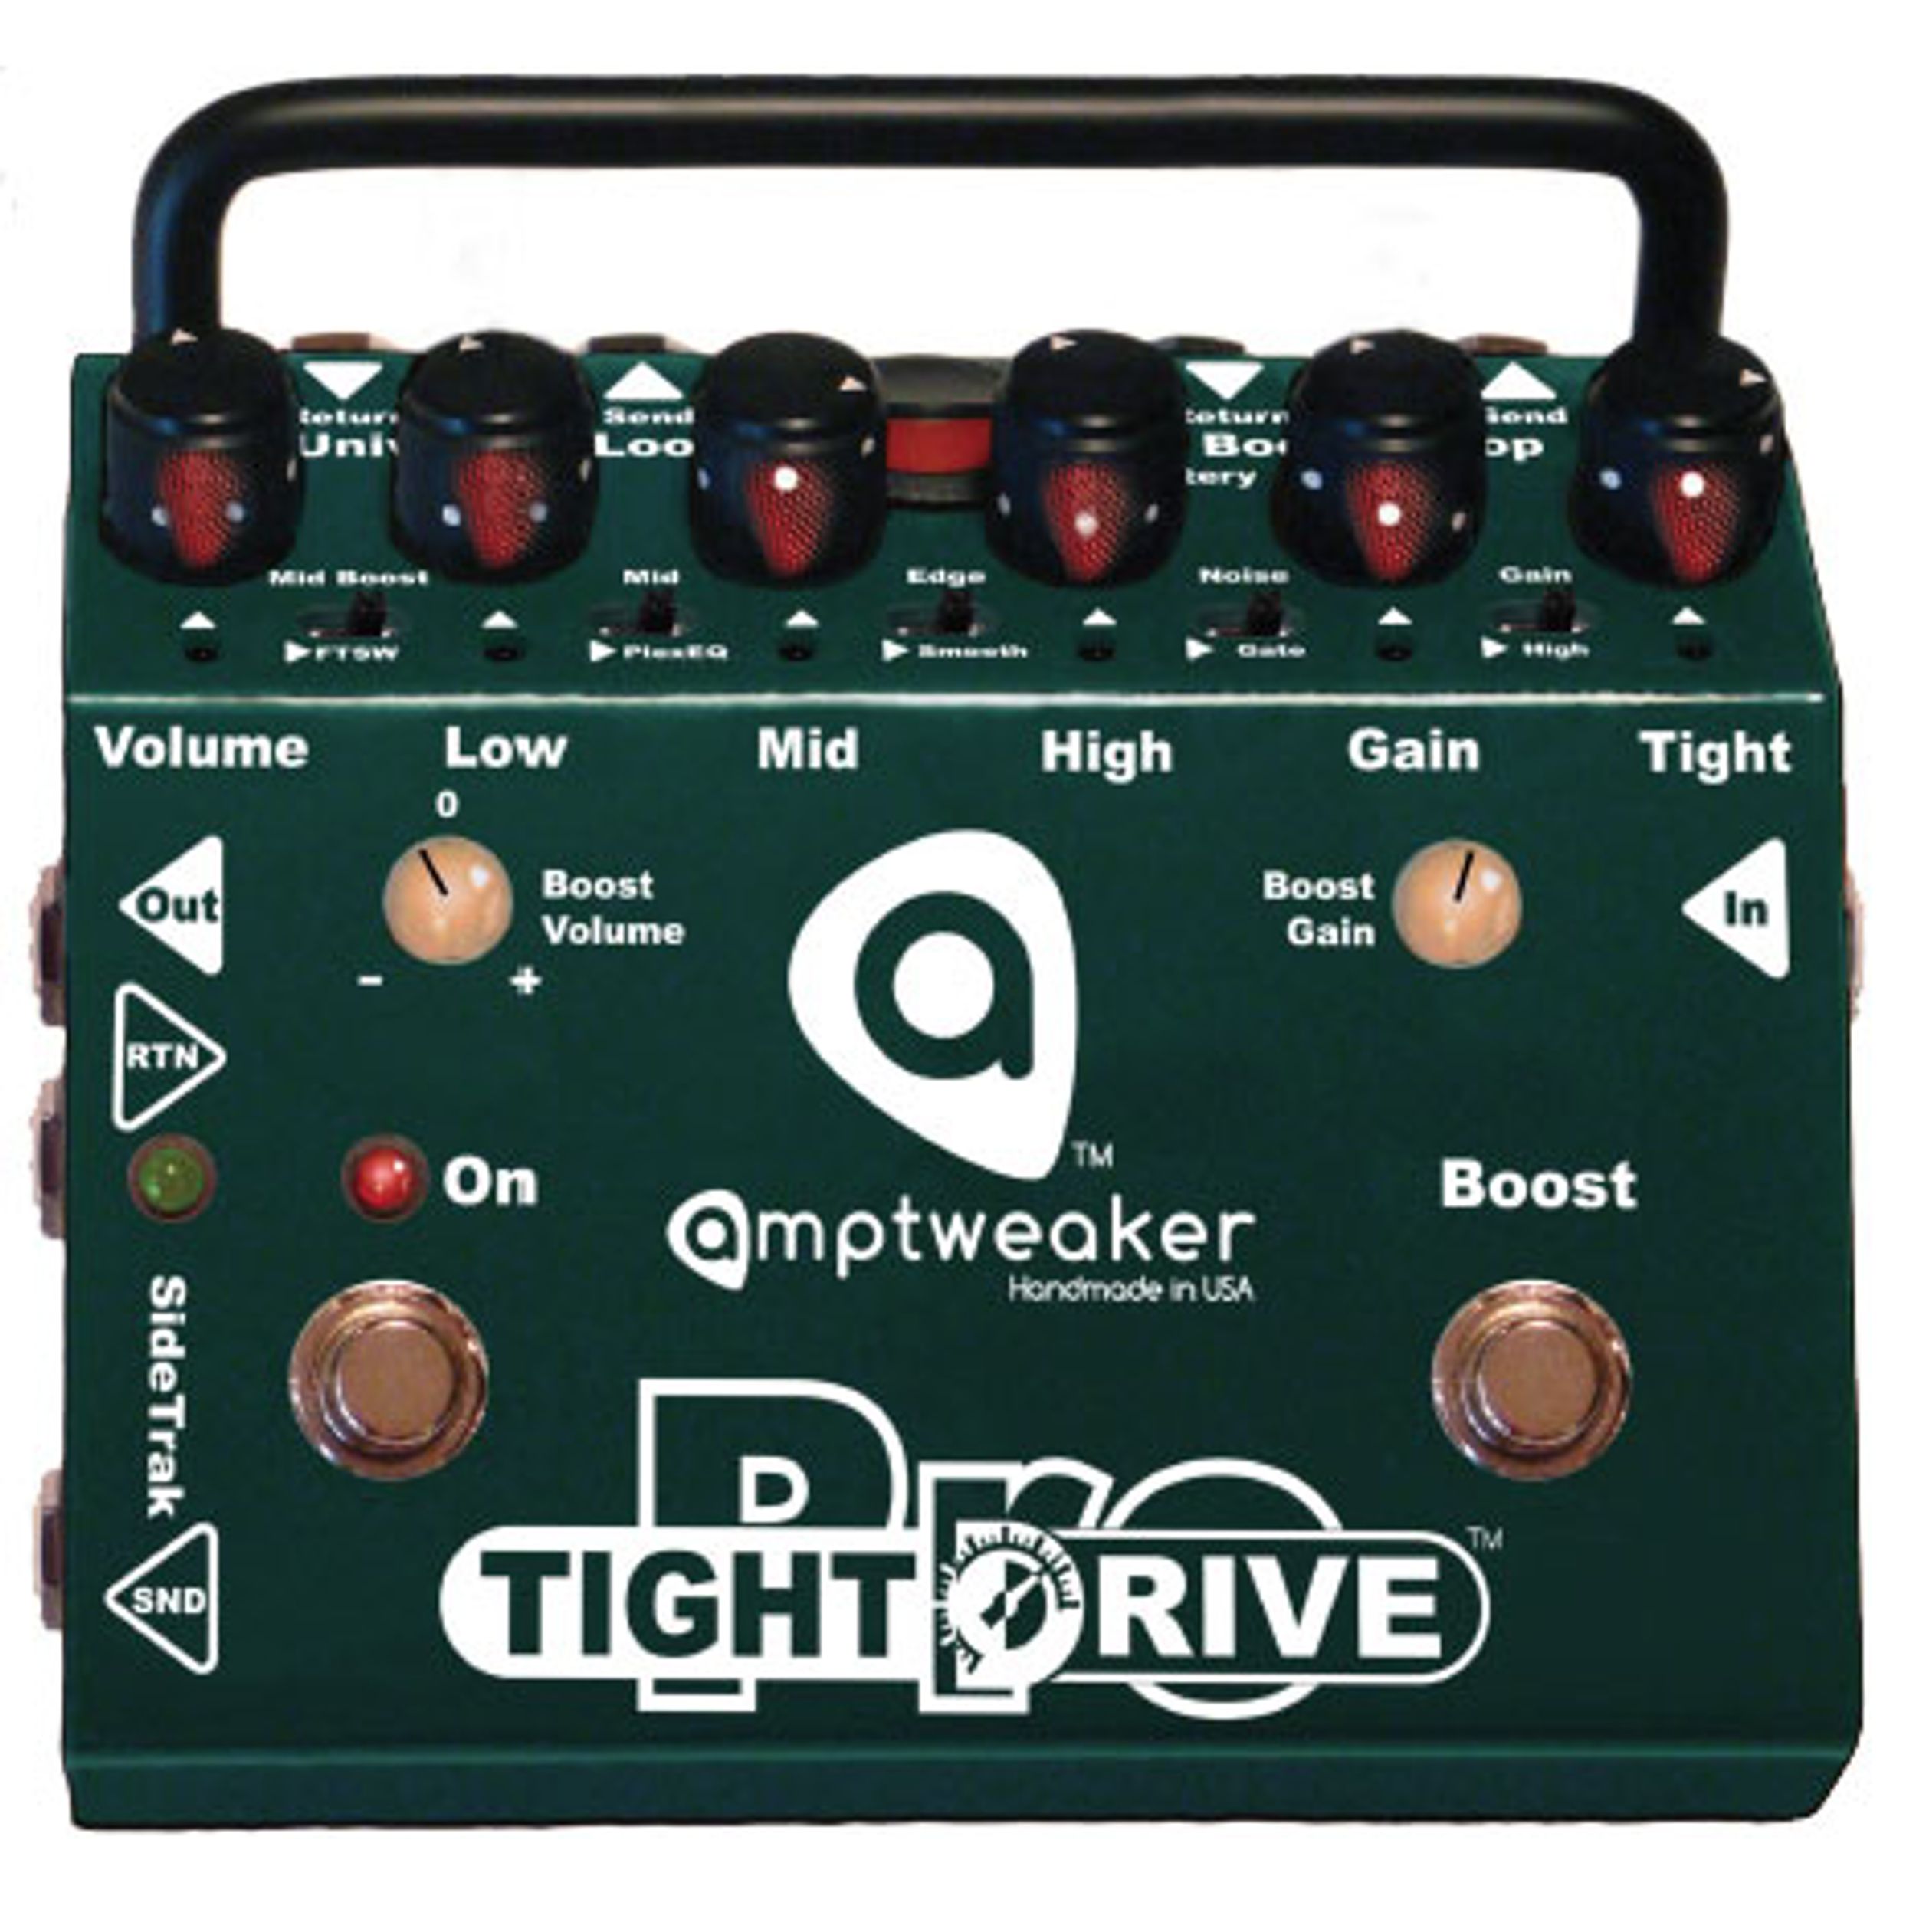 Amptweaker Announces the TightDrive Pro